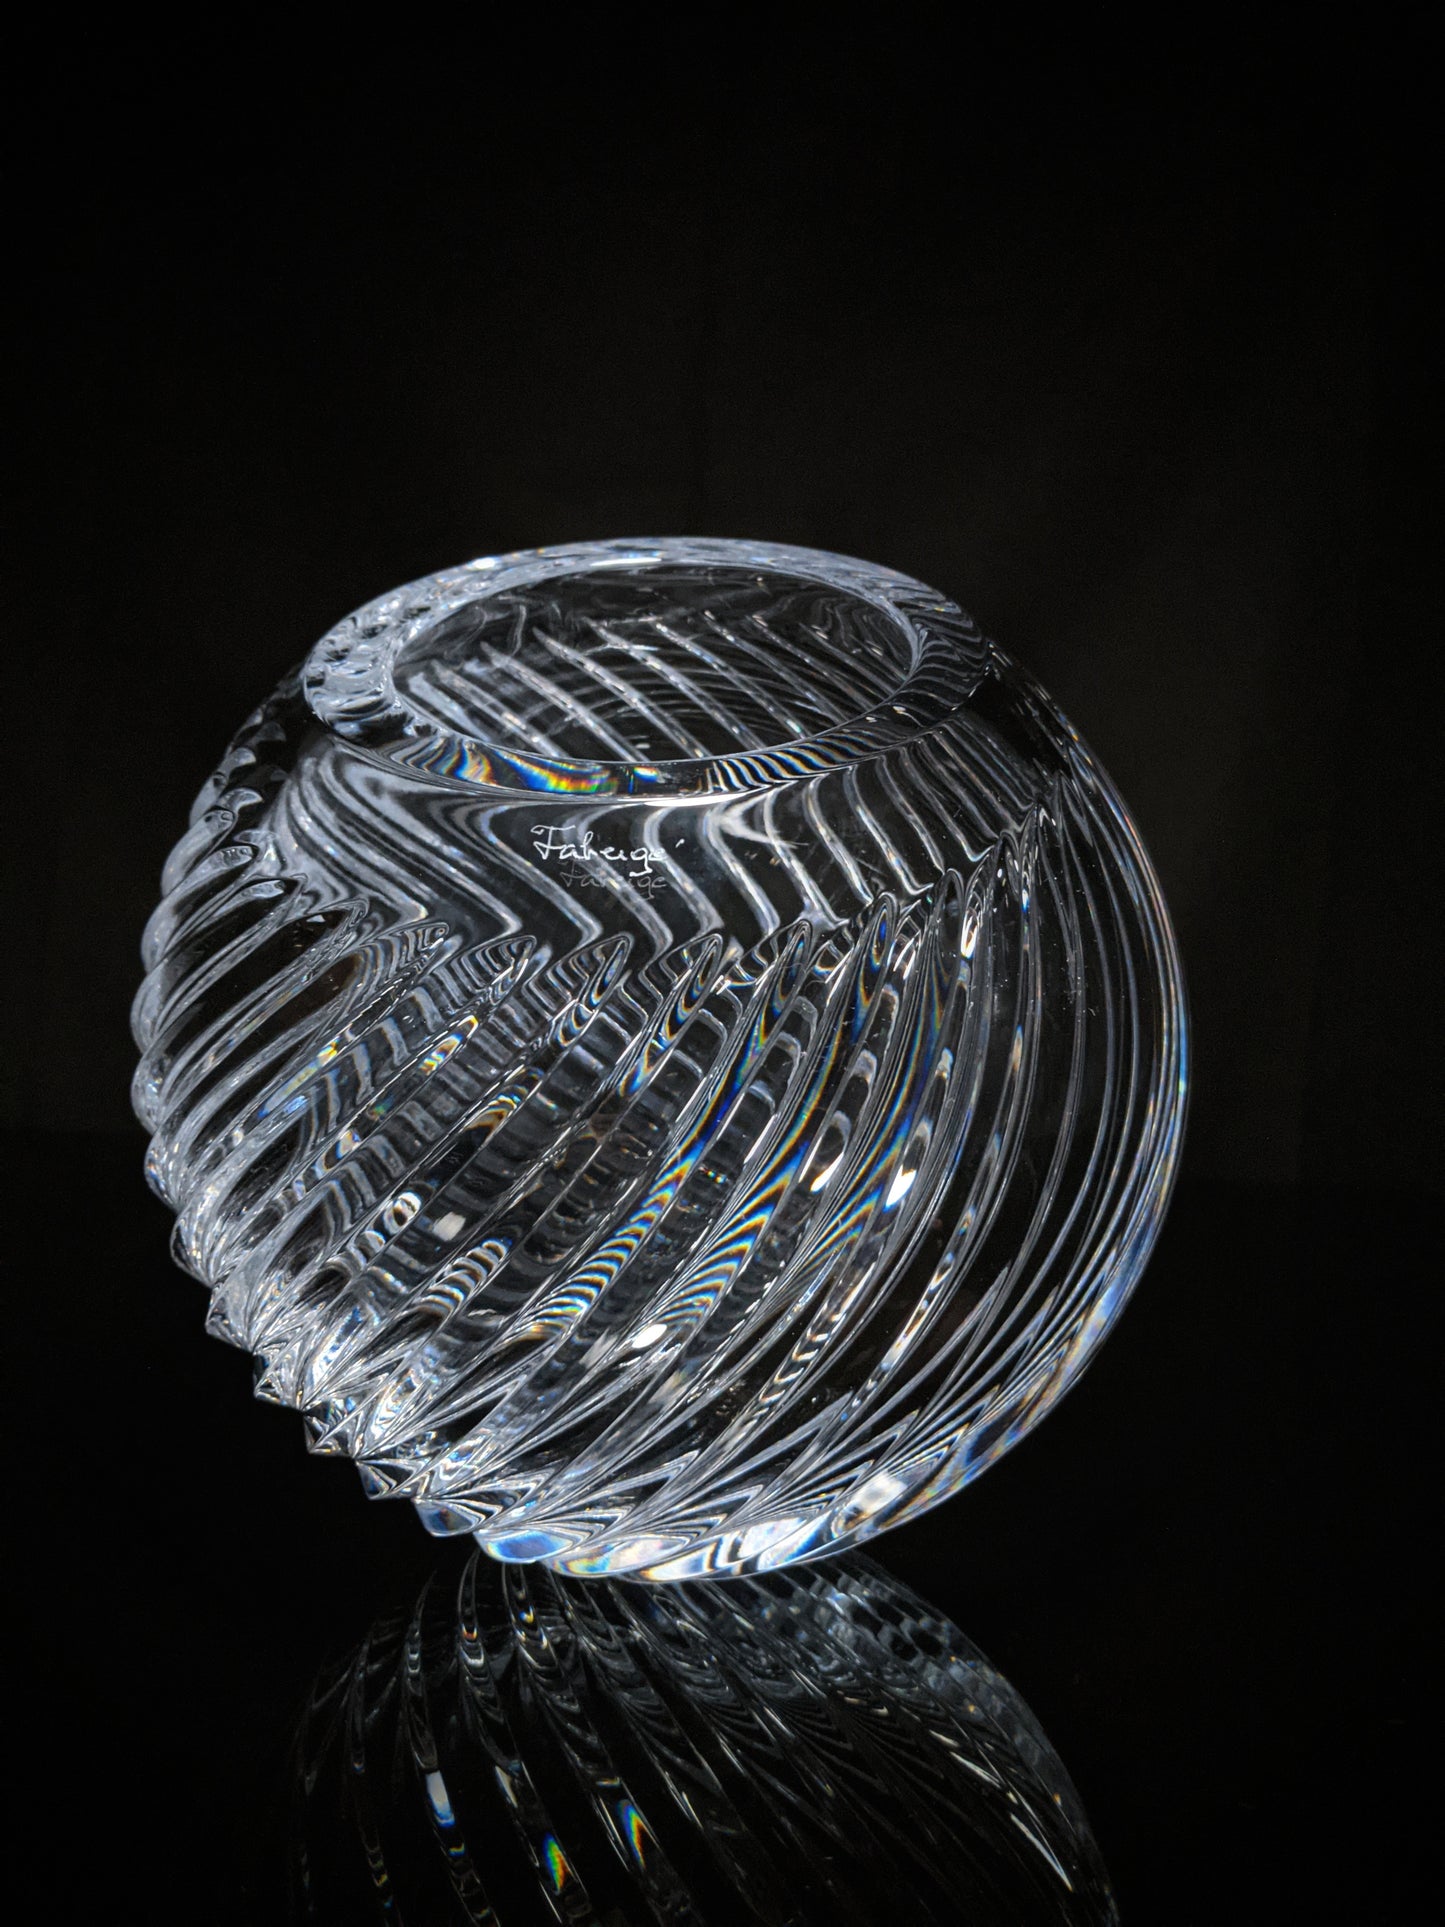 Faberge | Atelier Crystal Collection Bowl | New in the Box